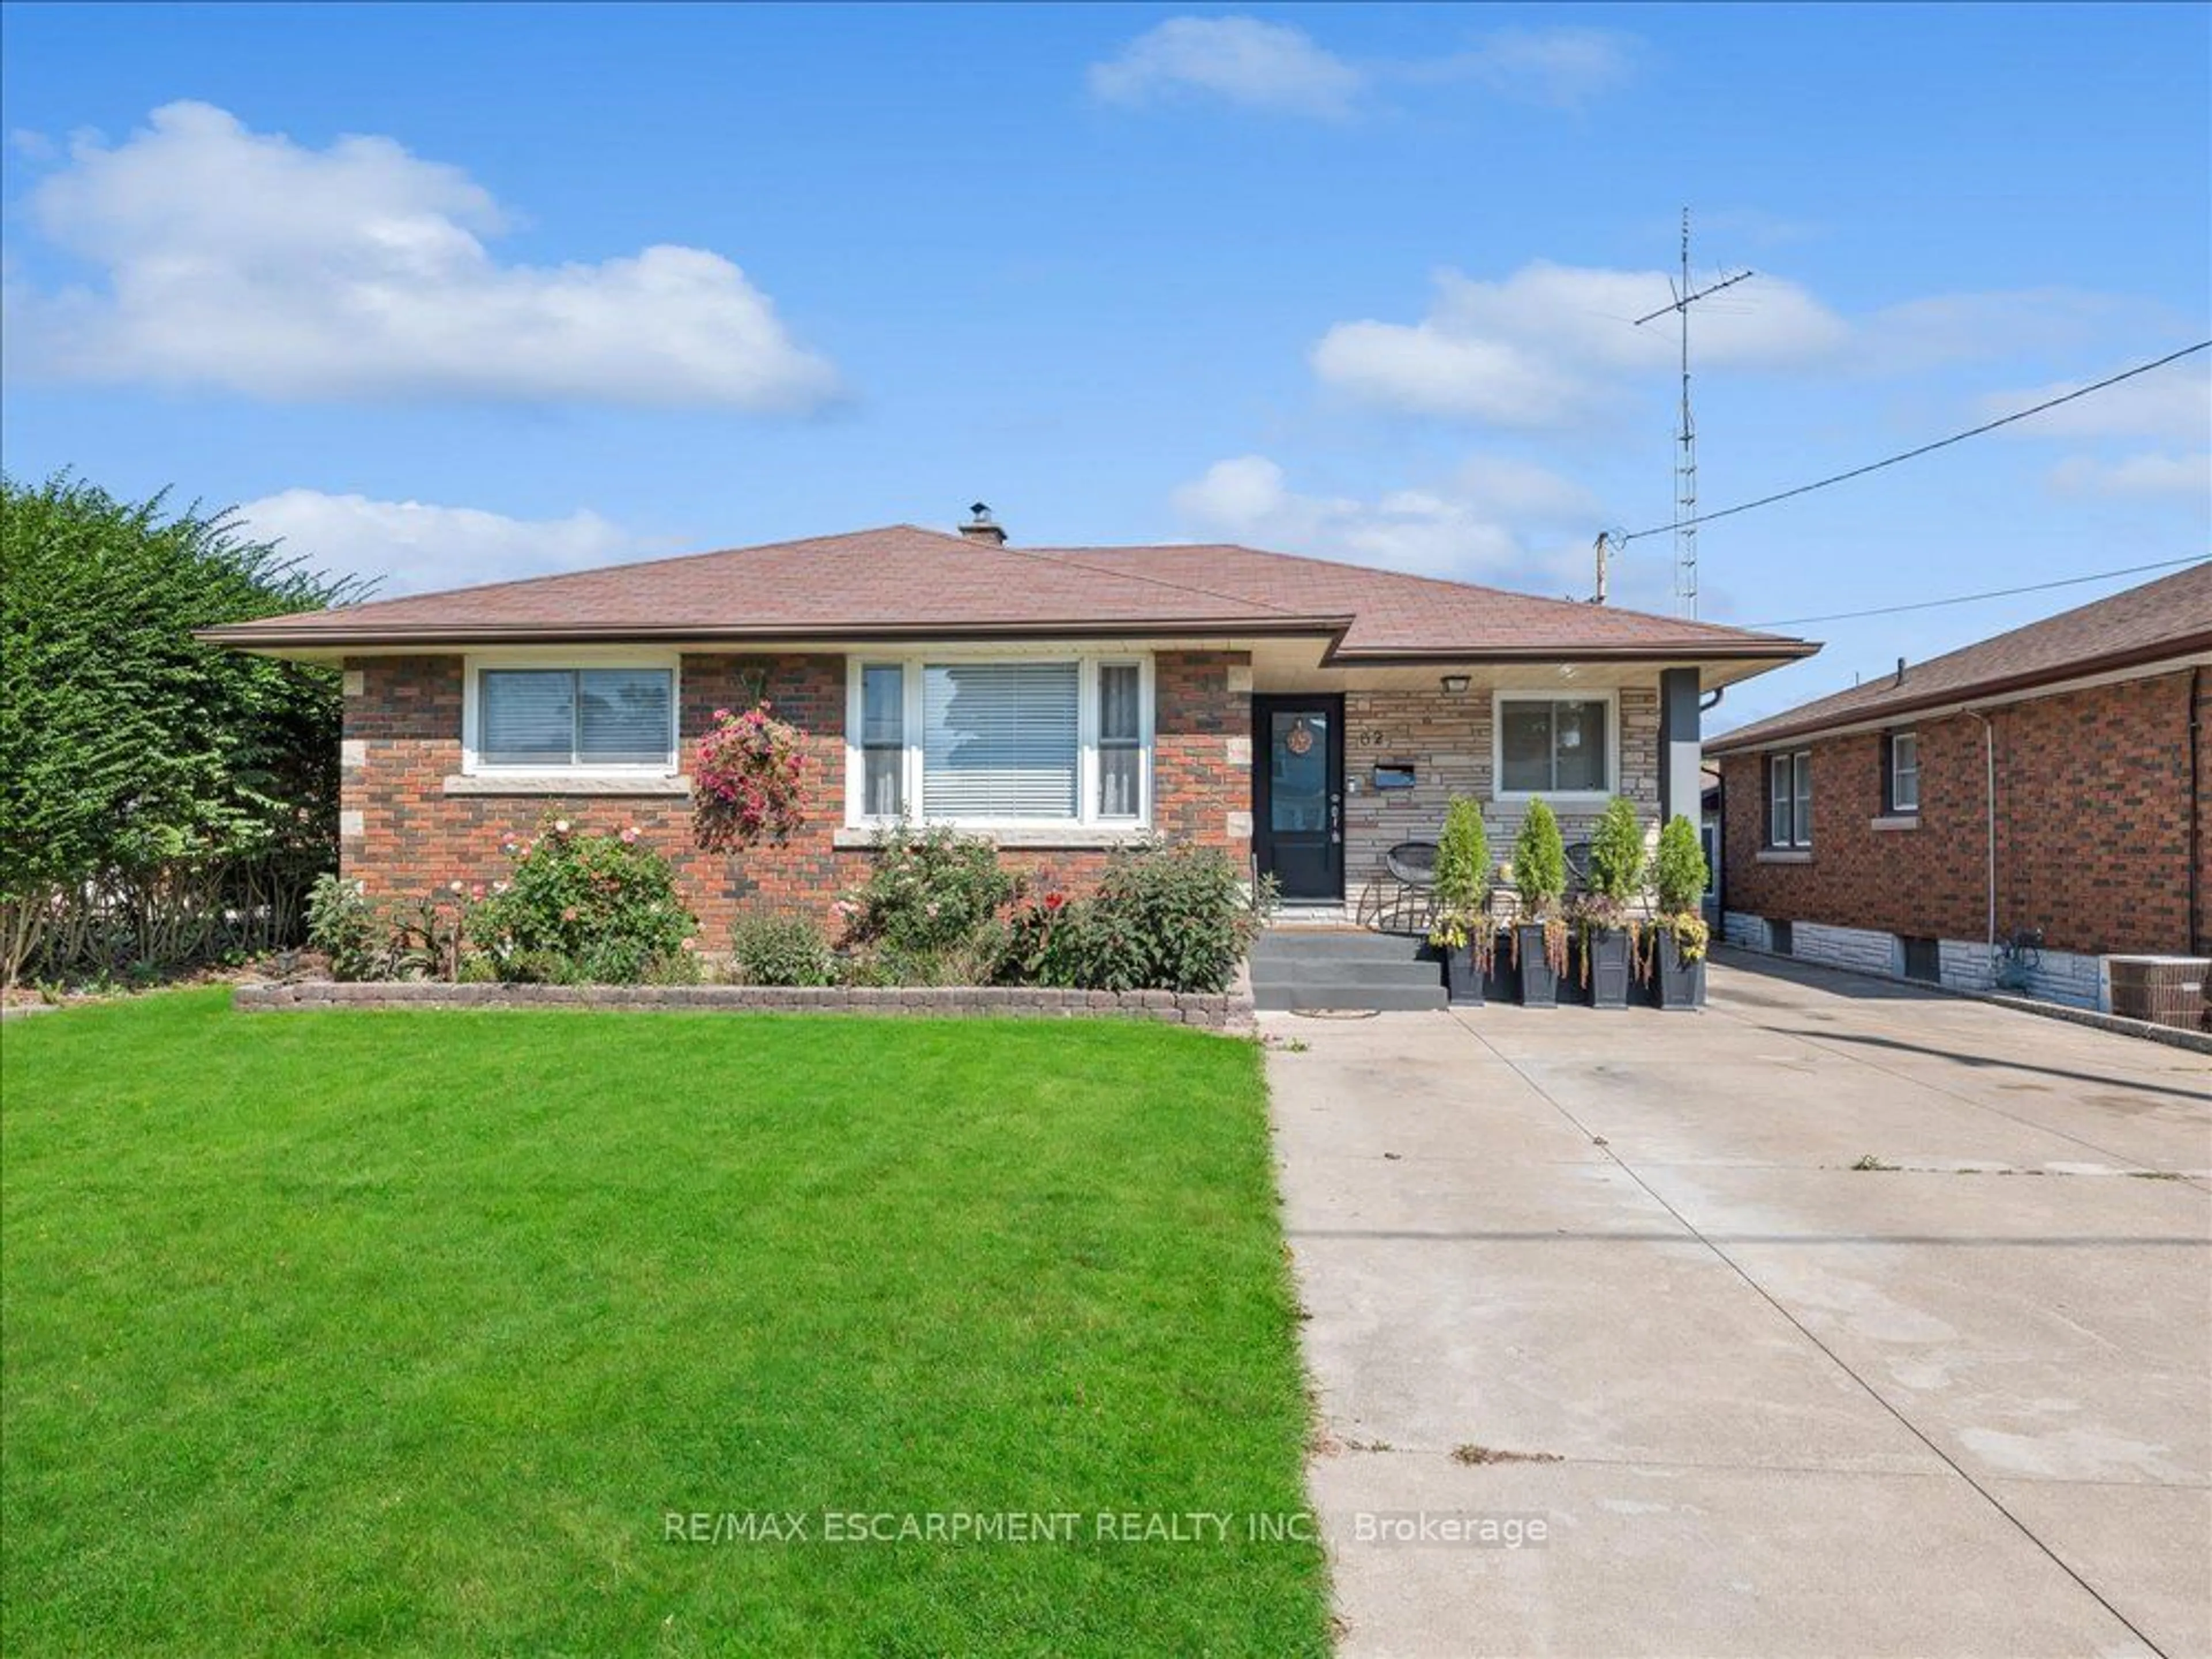 Home with brick exterior material for 62 Richmond St, Thorold Ontario L2V 3H1